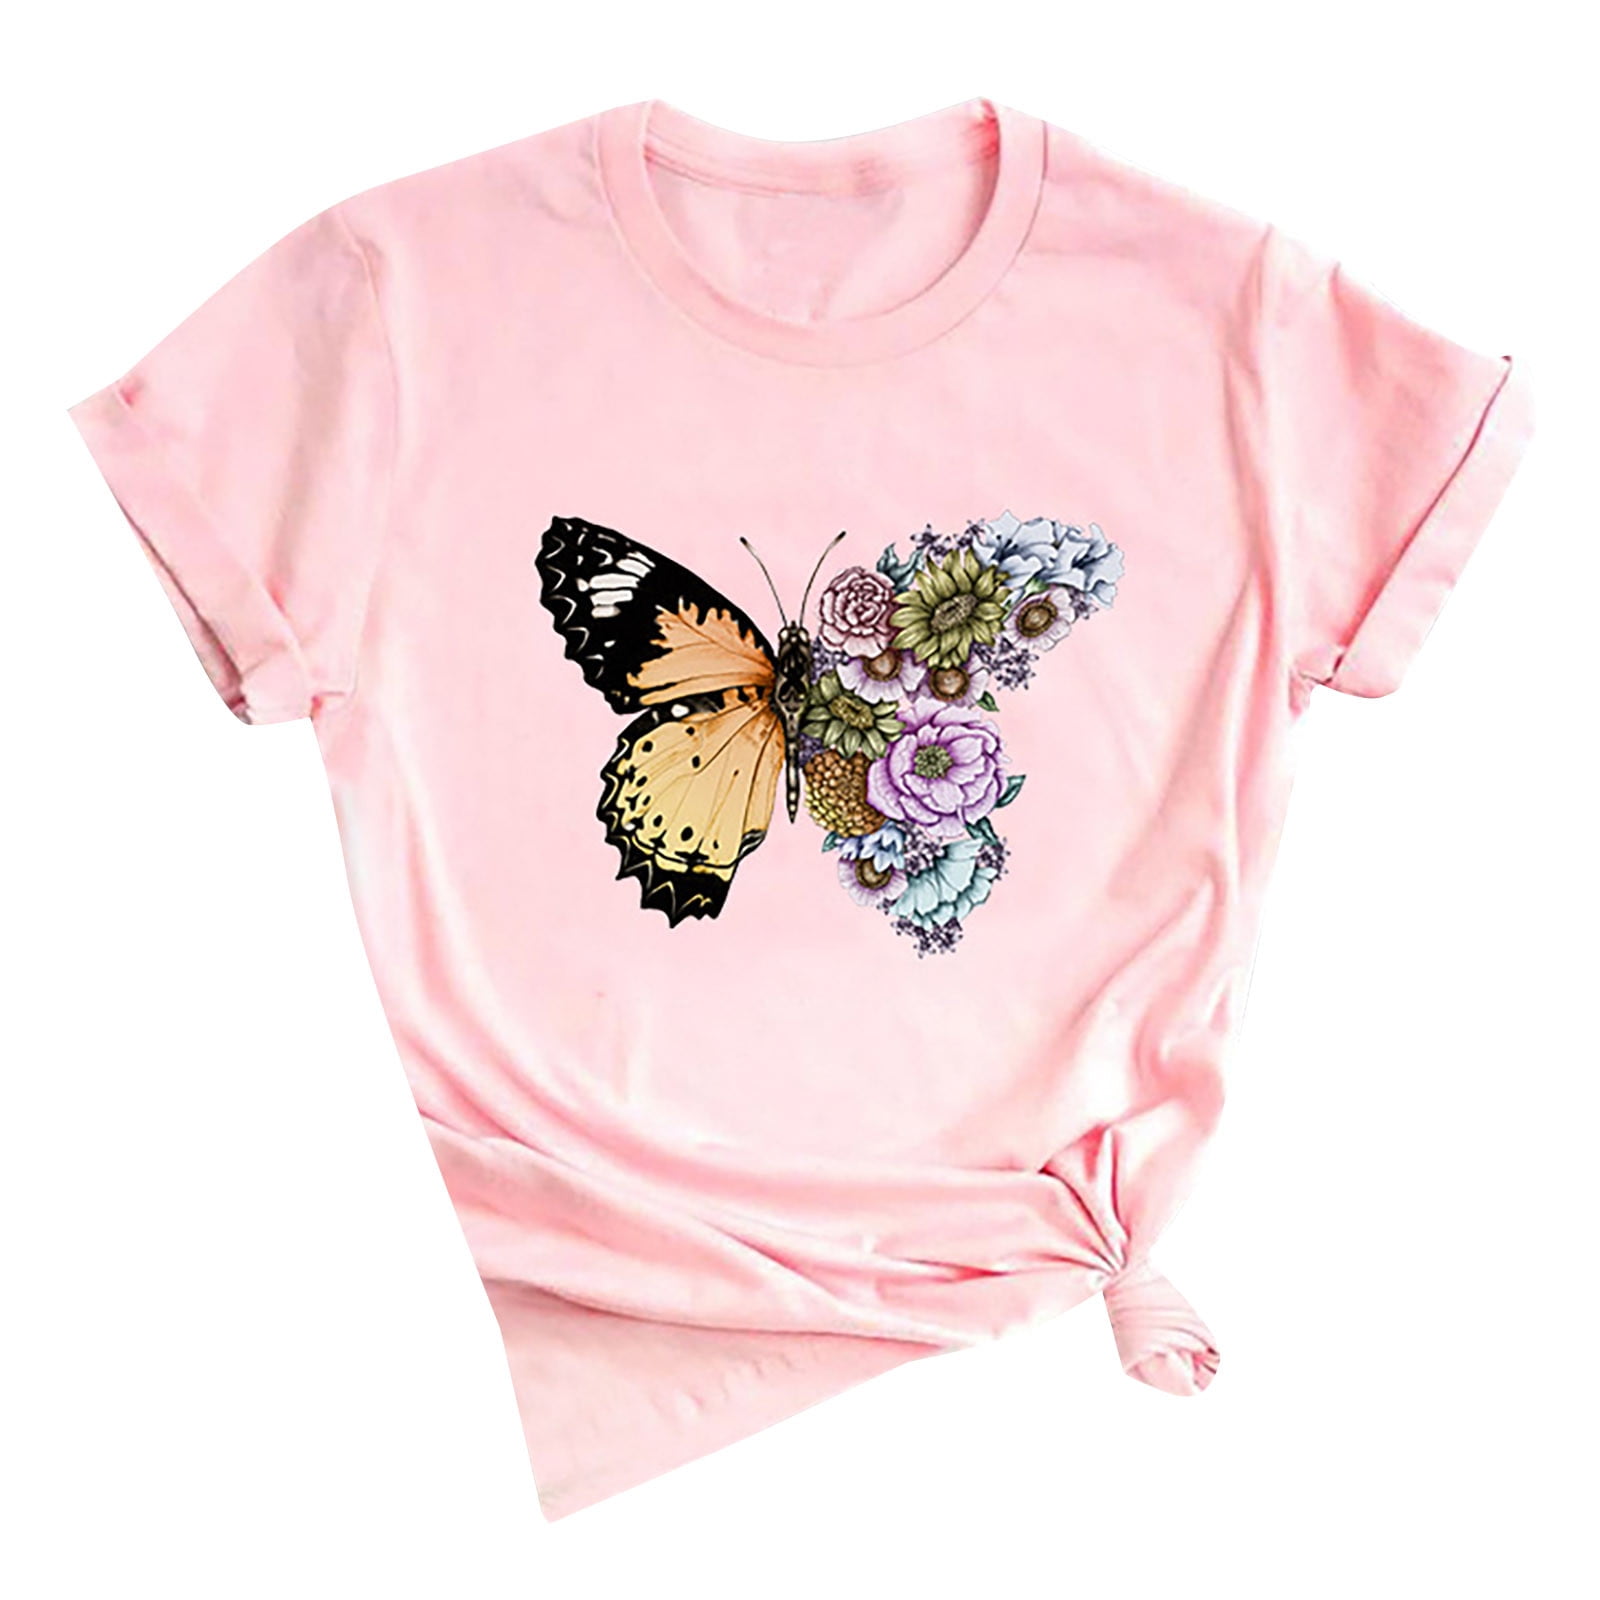 Hotkey Womens Fashion Sweatshirts Crewneck Long Sleeve Tops Butterfly Dragonfly Printed Casual Pullover Jumper Blouse Shirts 